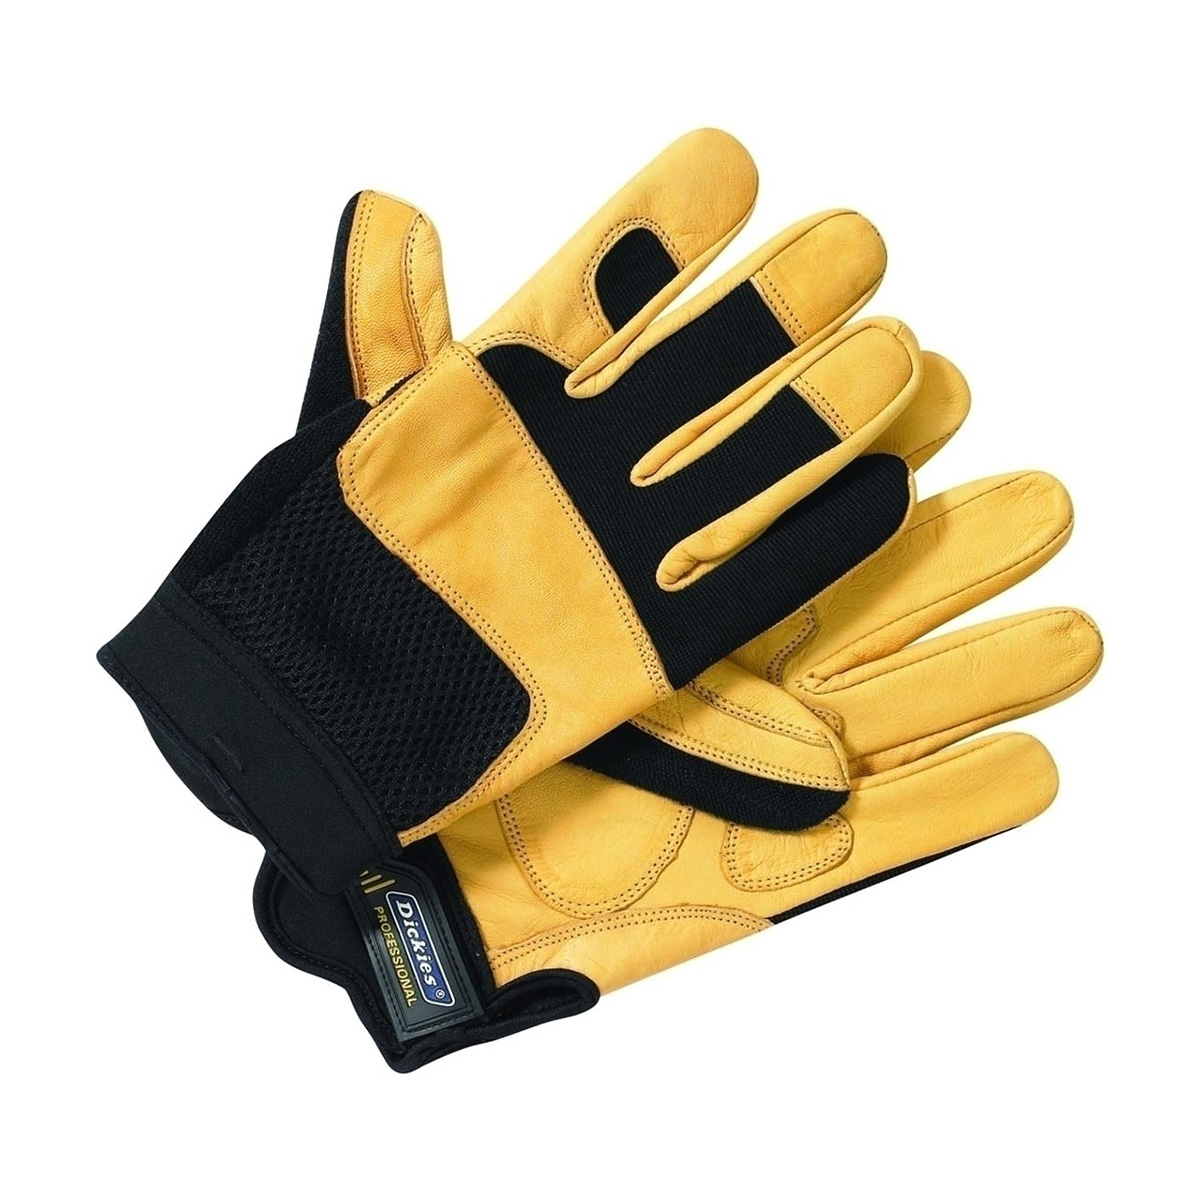 christmas-gift-ideas-for-car-and-diy-lover/images/Mechanic-Work-Gloves.jpeg